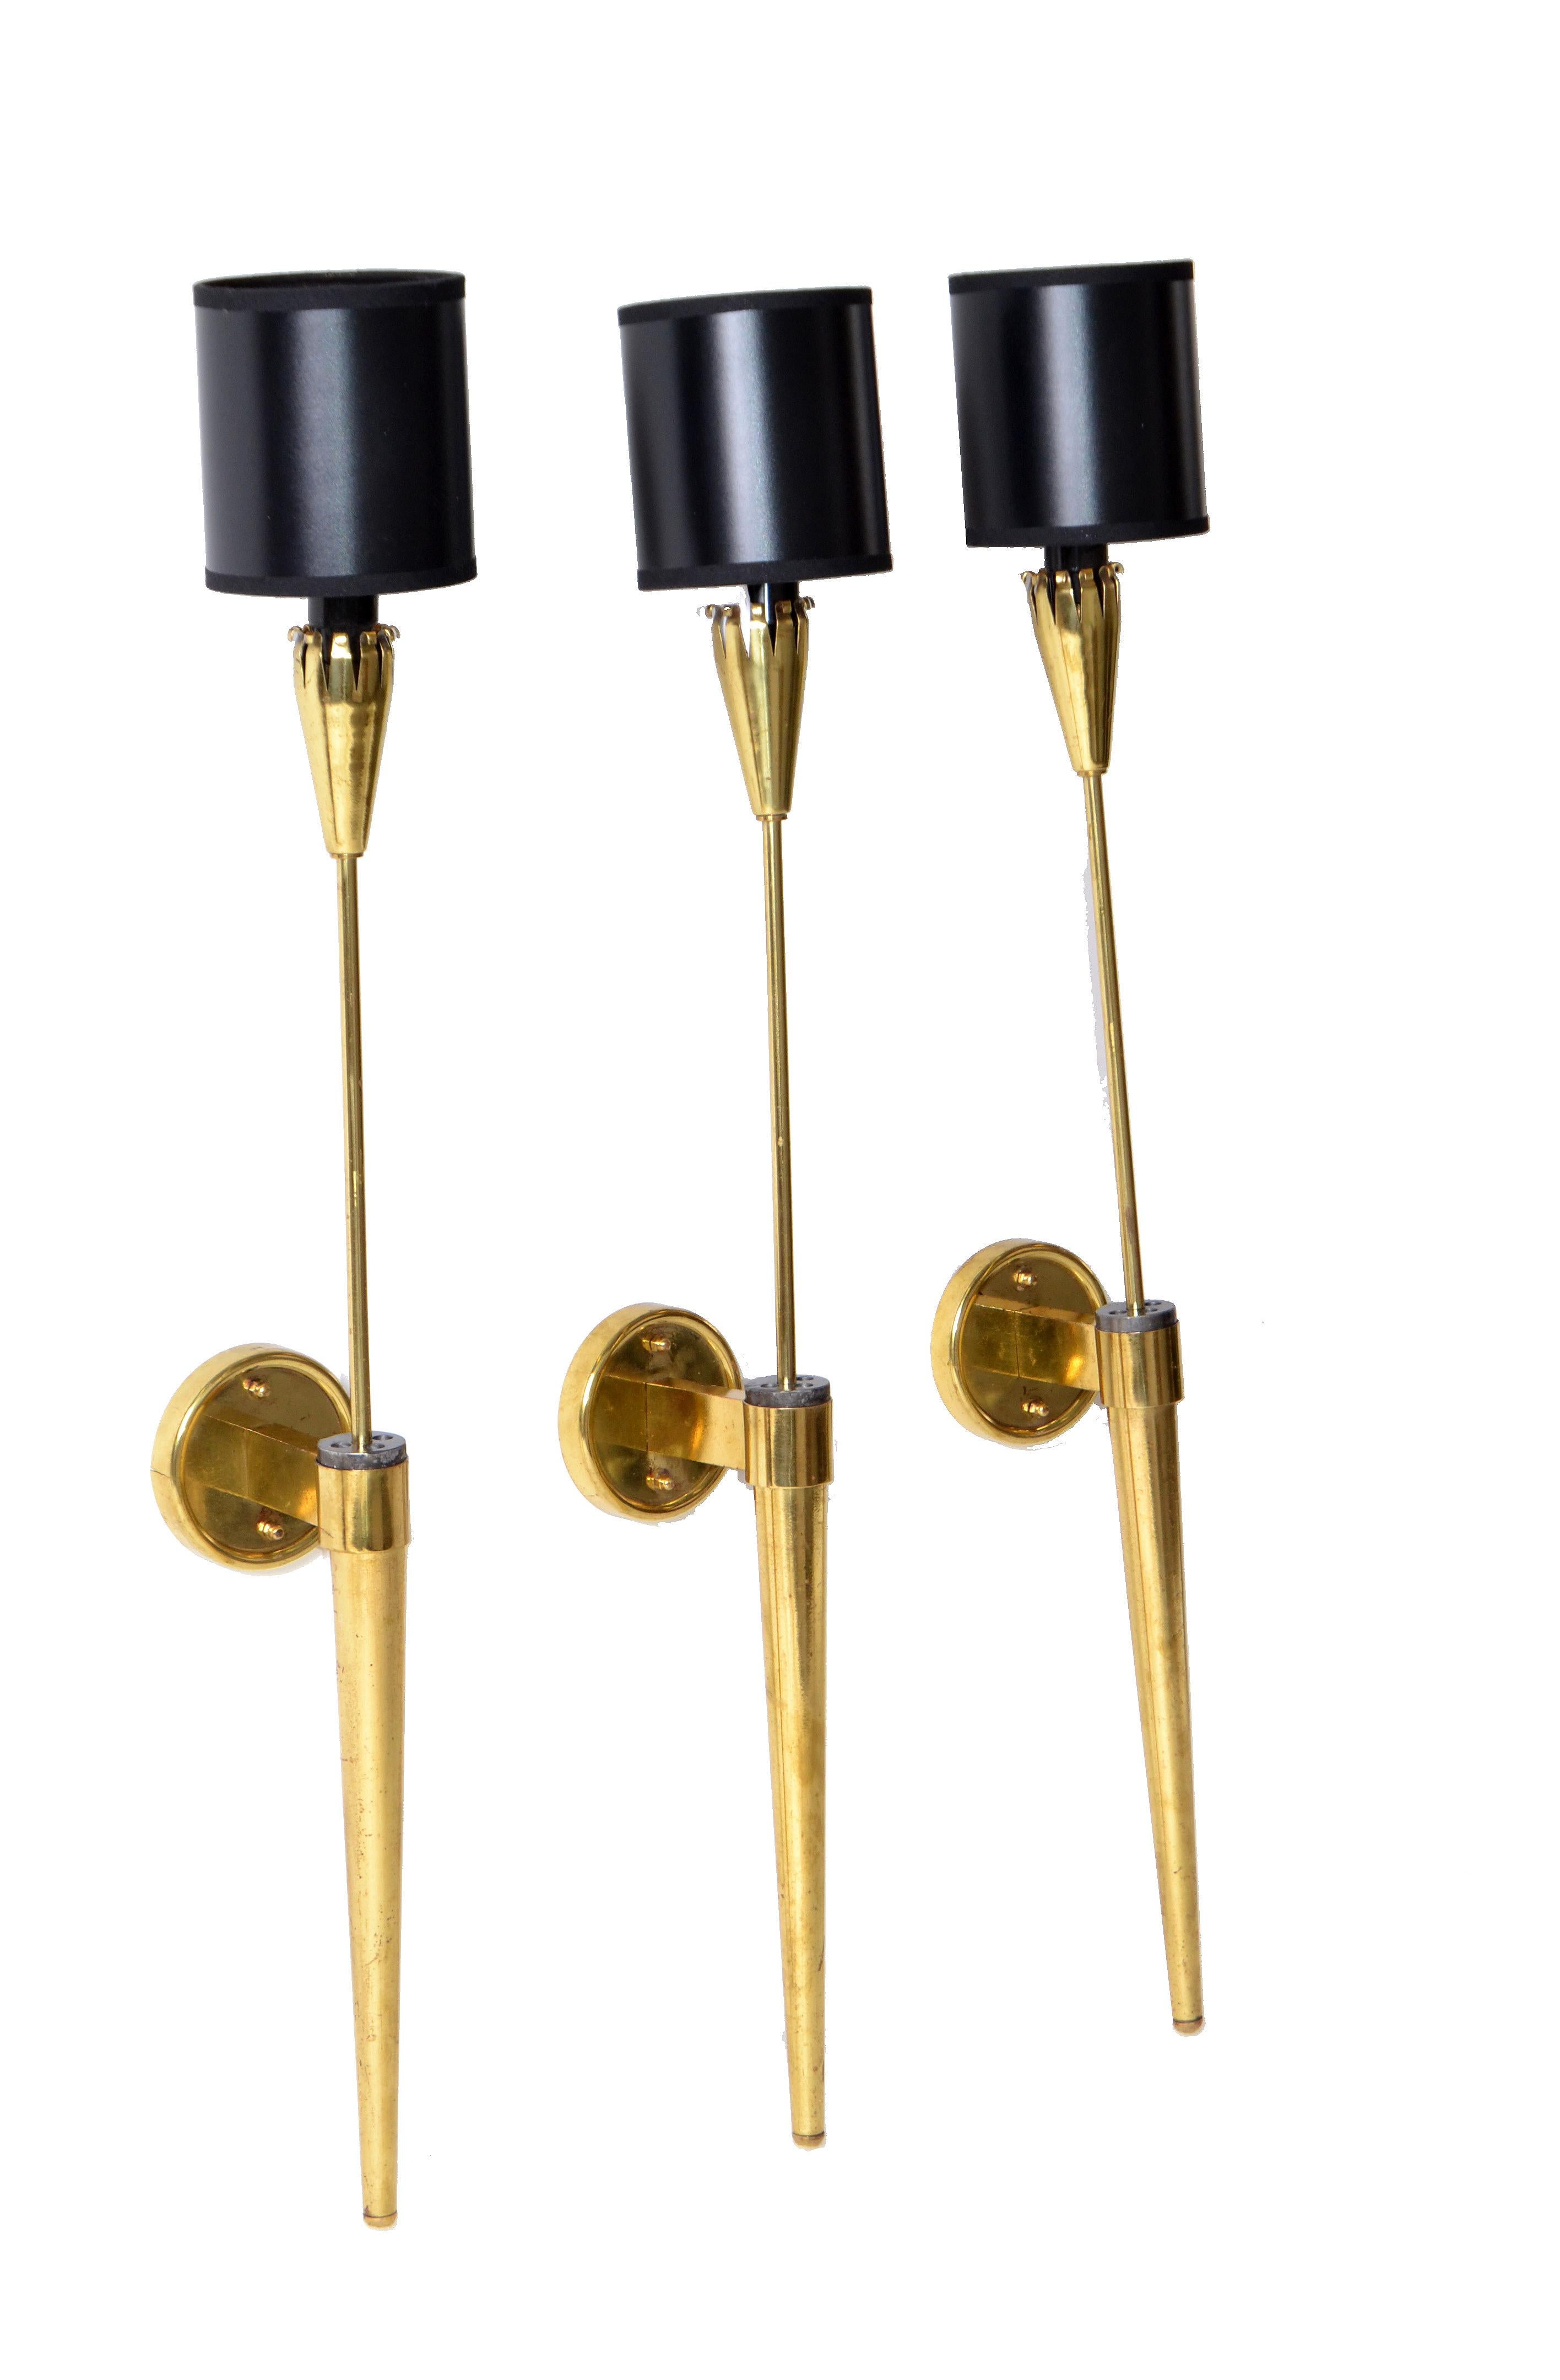 Mid-Century Modern set of 3 Maison Jansen style brass torch wall sconces with black and gold drum paper shades.
US re-wired and each one takes a max 40 watts candelabra light bulb.
Back plate measures 3.5 inches diameter.